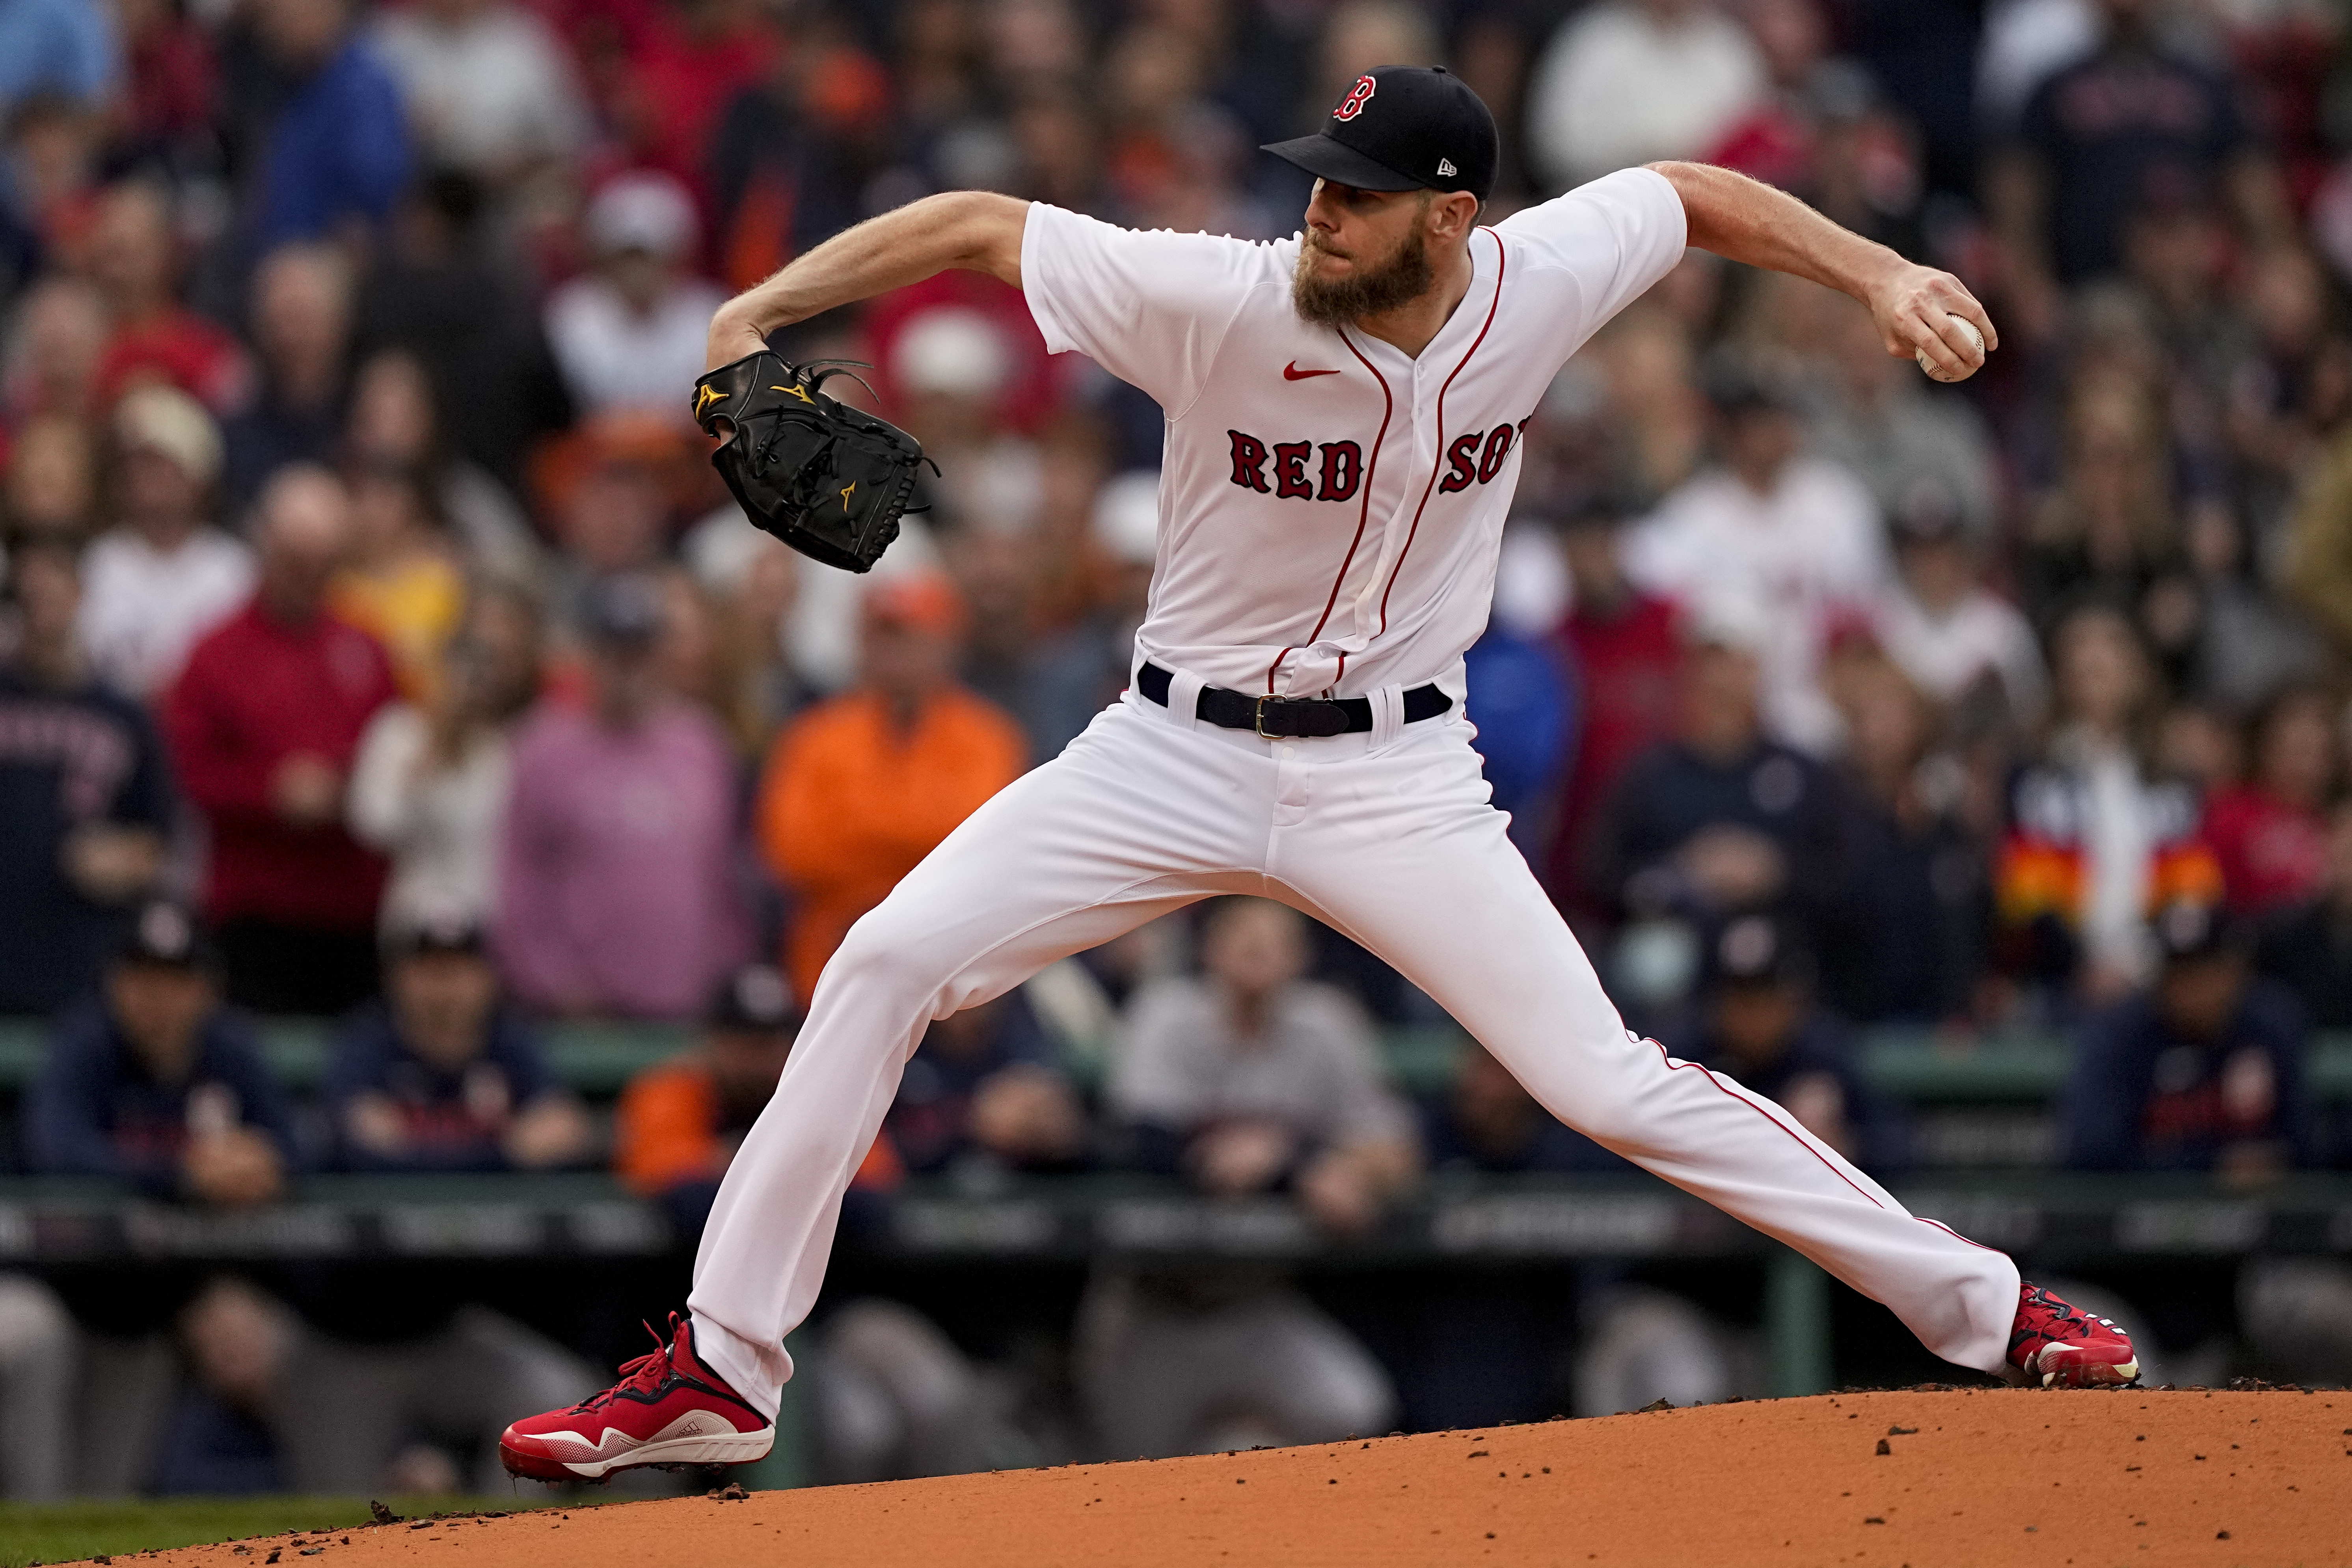 Tigers manager praises Chris Sale's return to the Red Sox mound